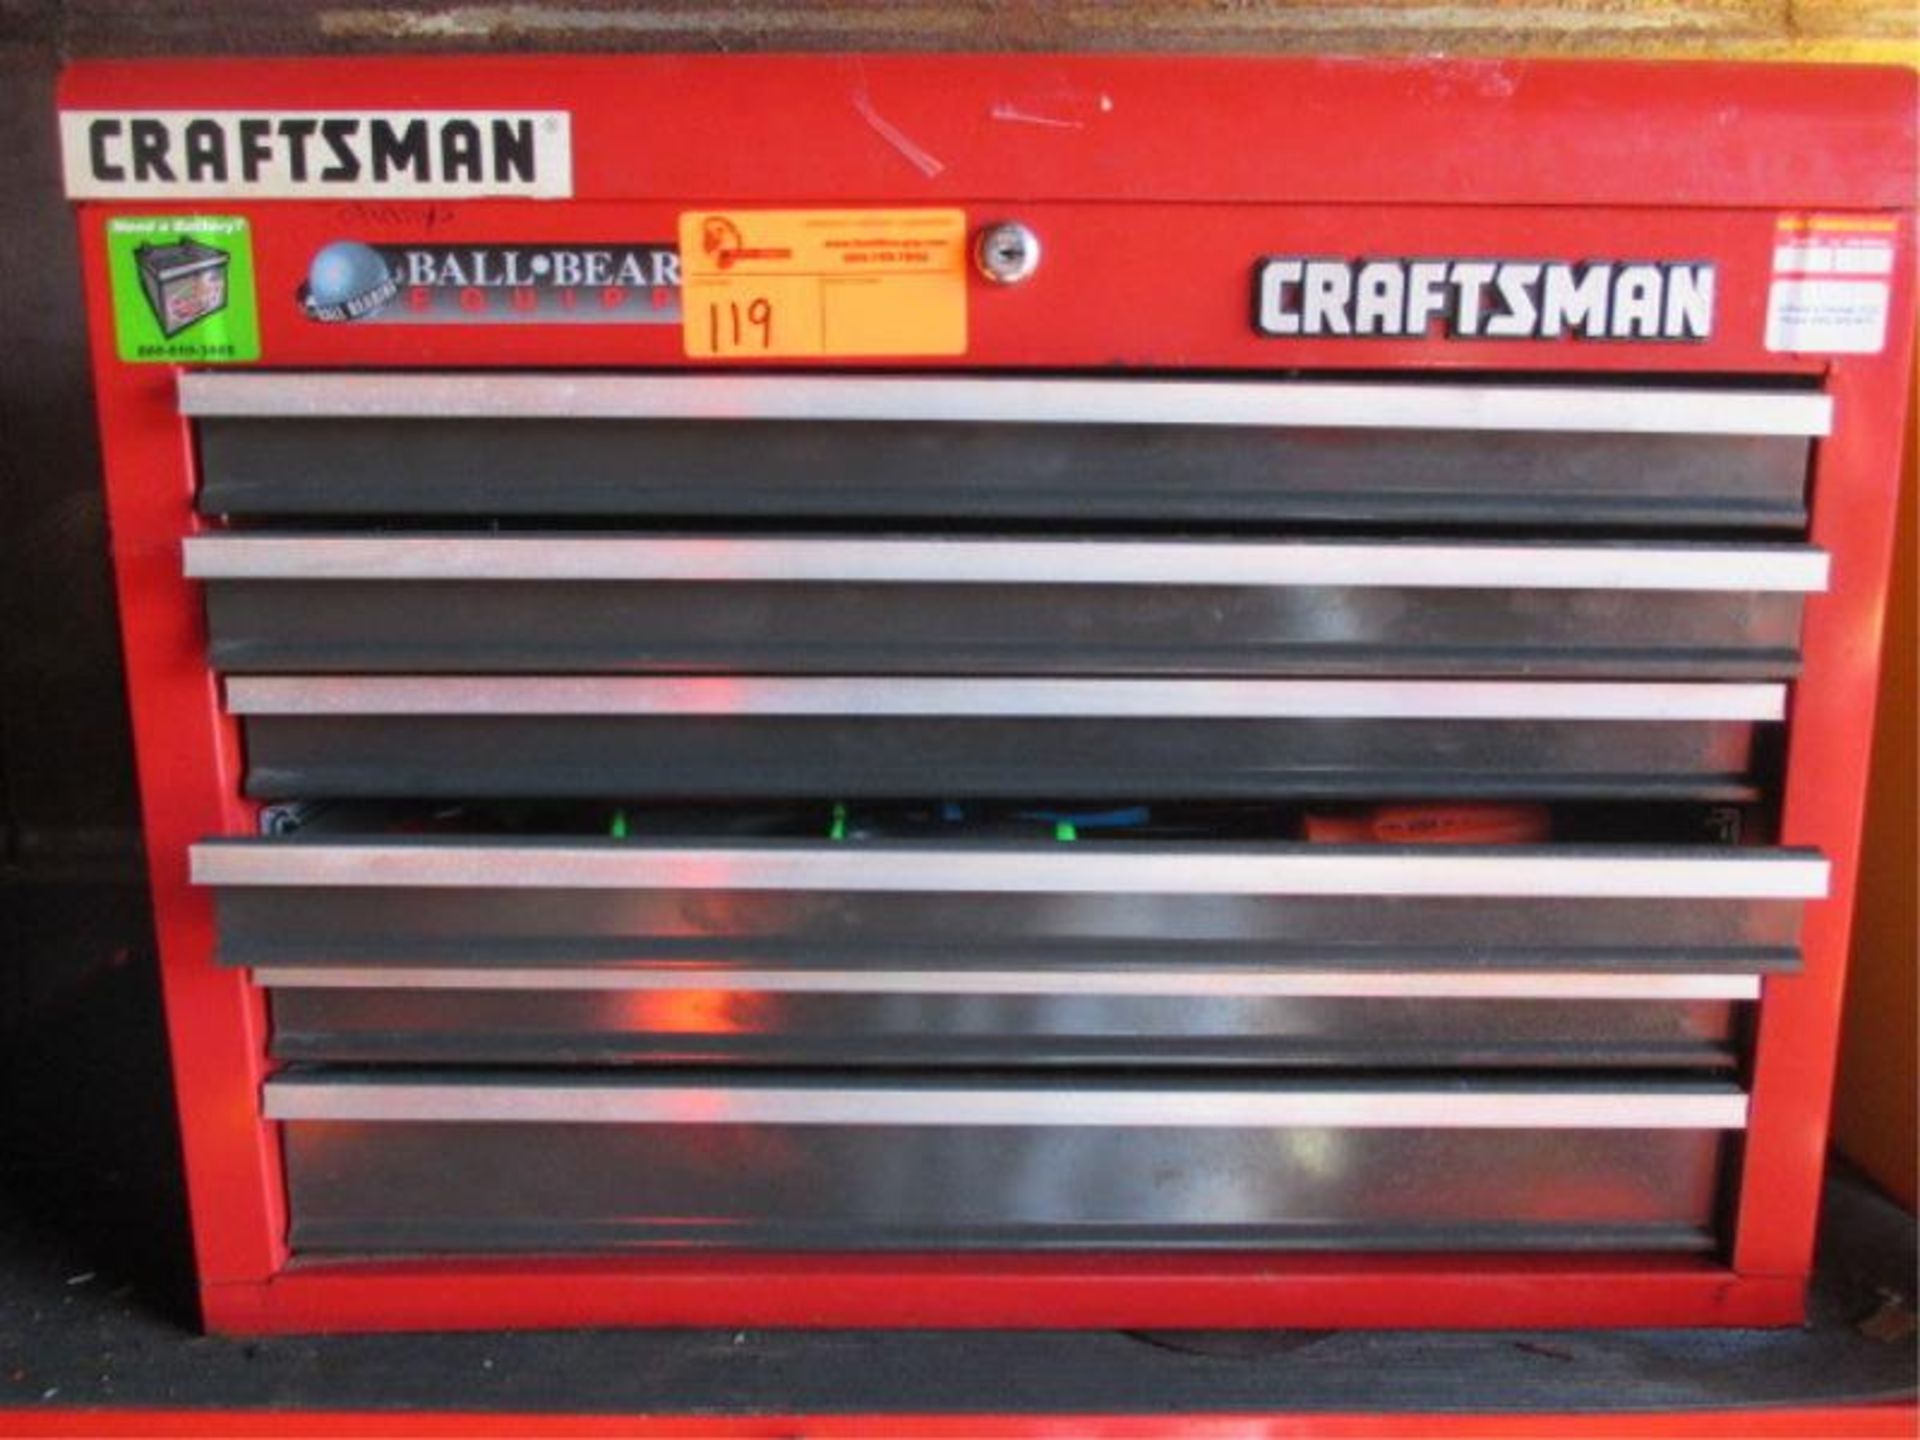 Craftsman Tool Box, Red, 6 Drawers, Lift Top Cover w/ Assorted Tools Including: Screw Drivers, Nut